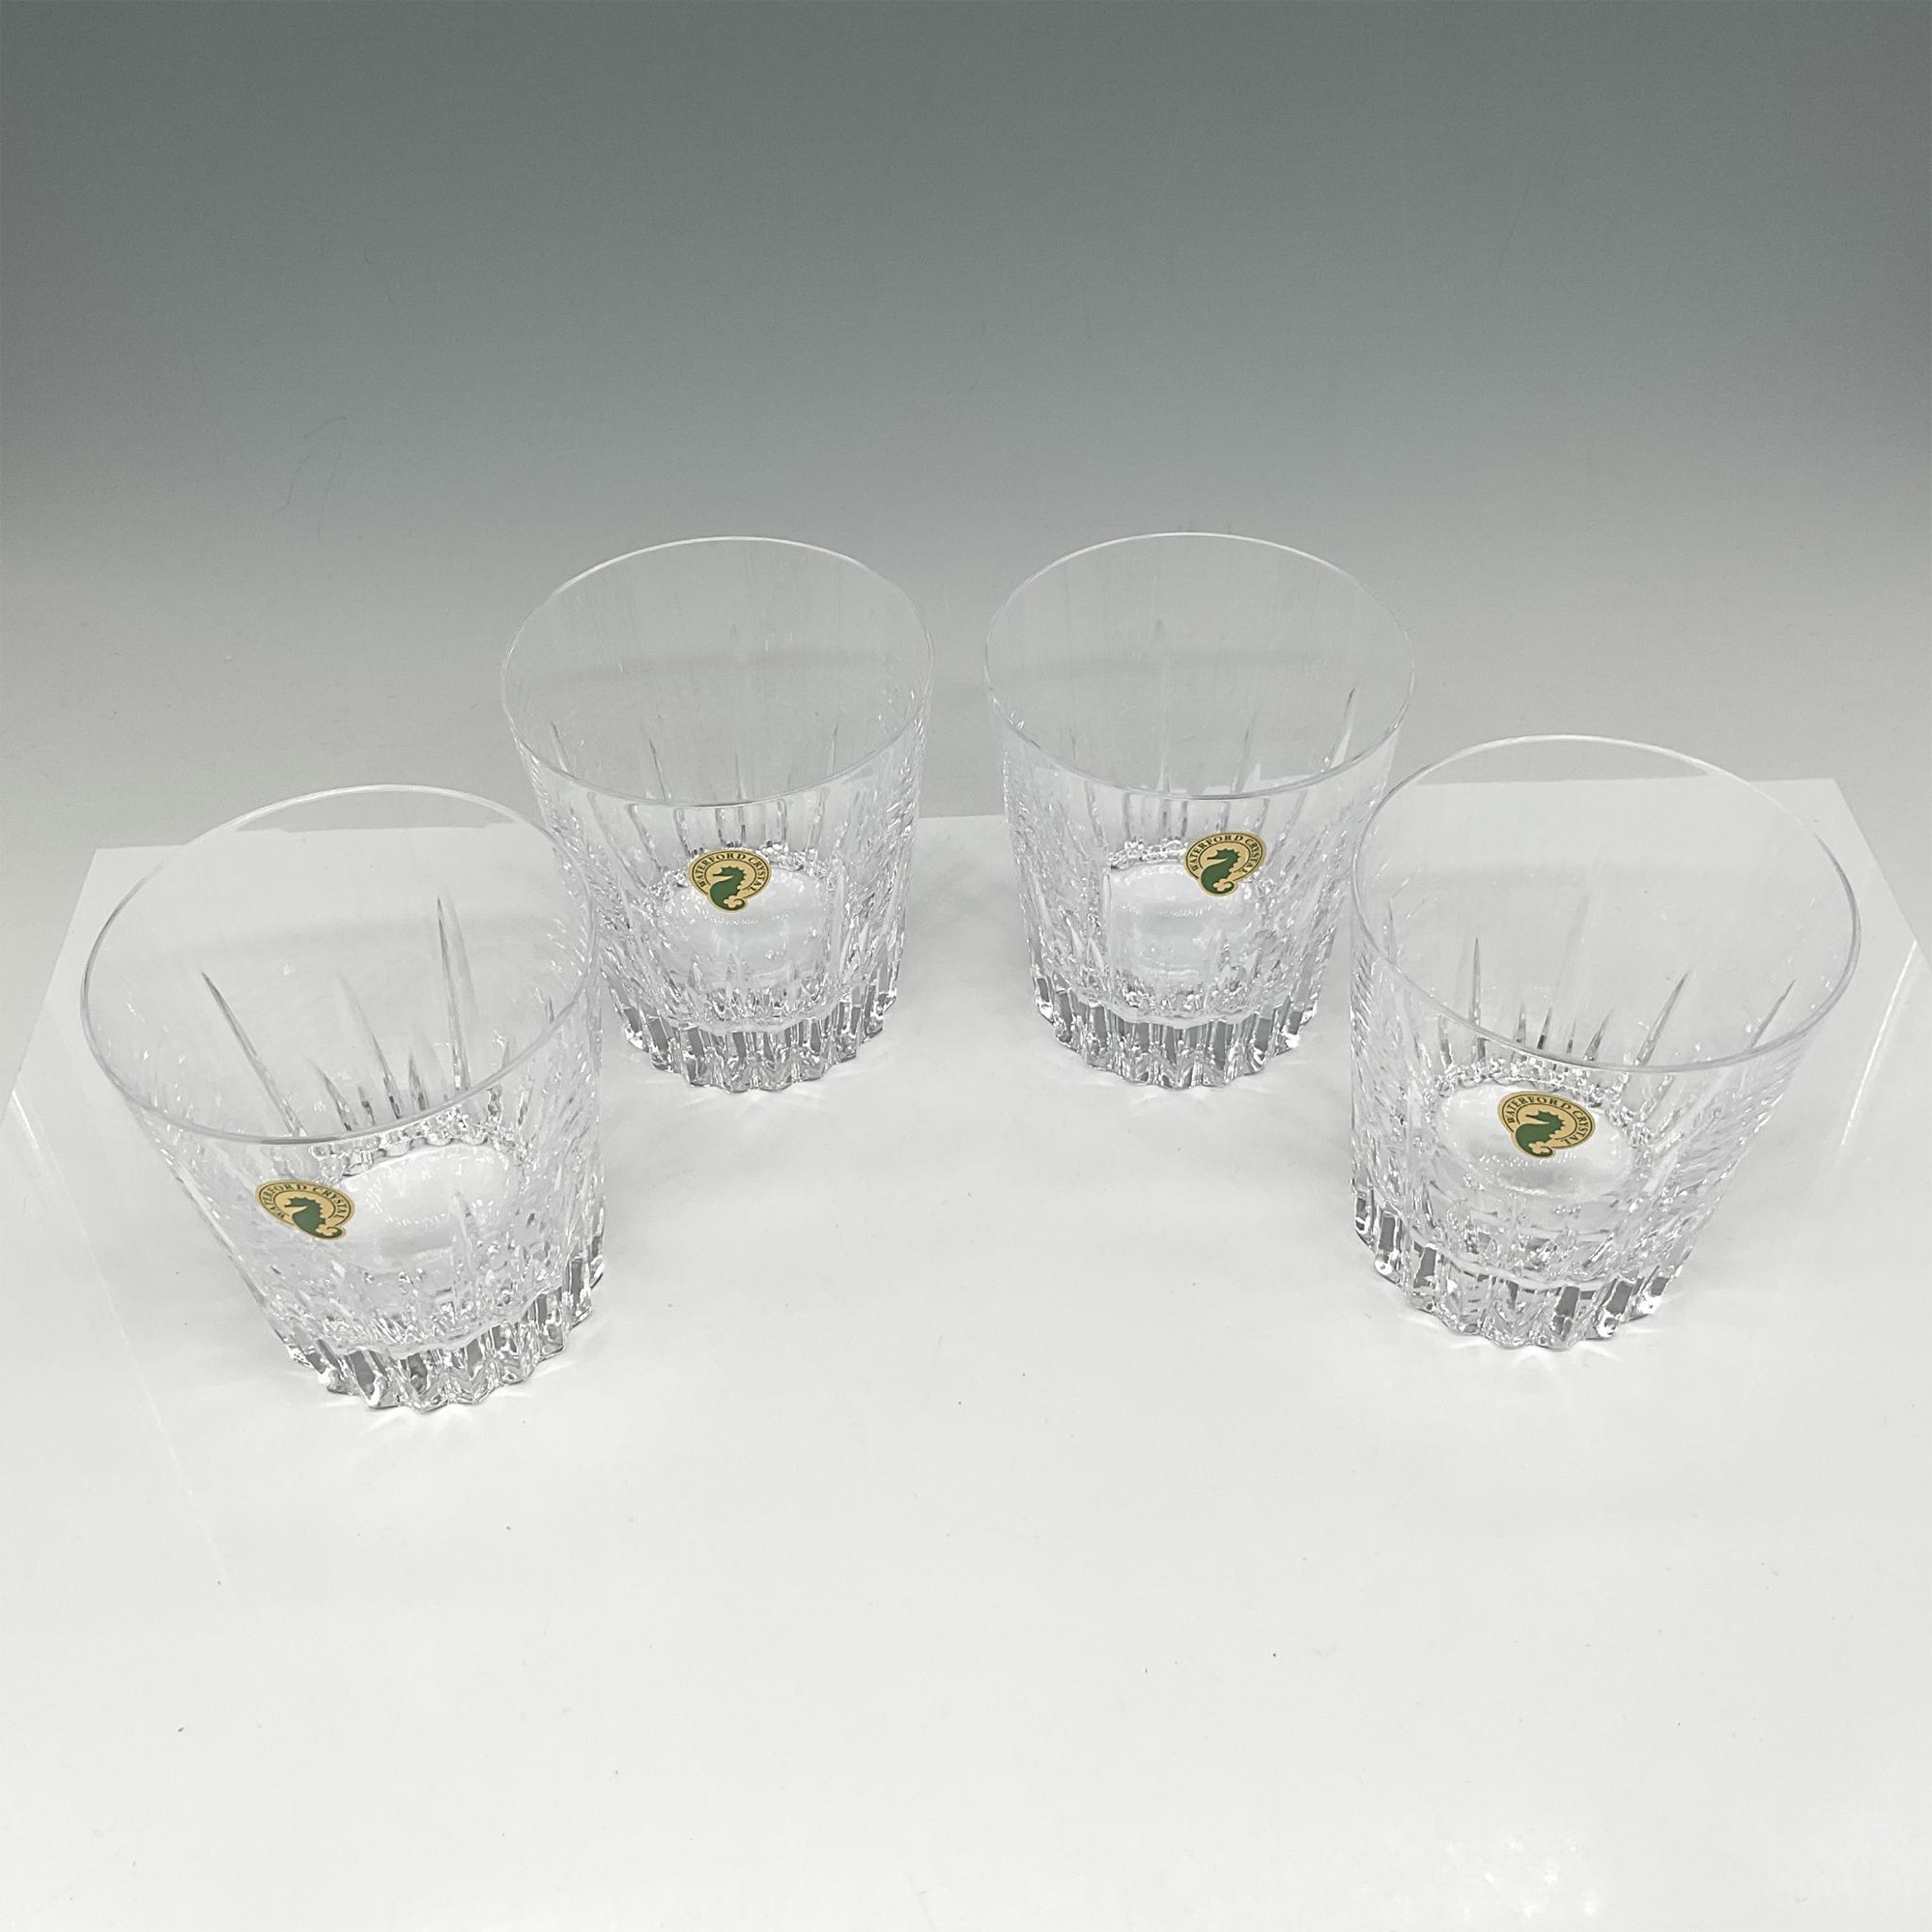 Waterford Crystal Southbridge Tumblers, Set of 4 - Image 2 of 4